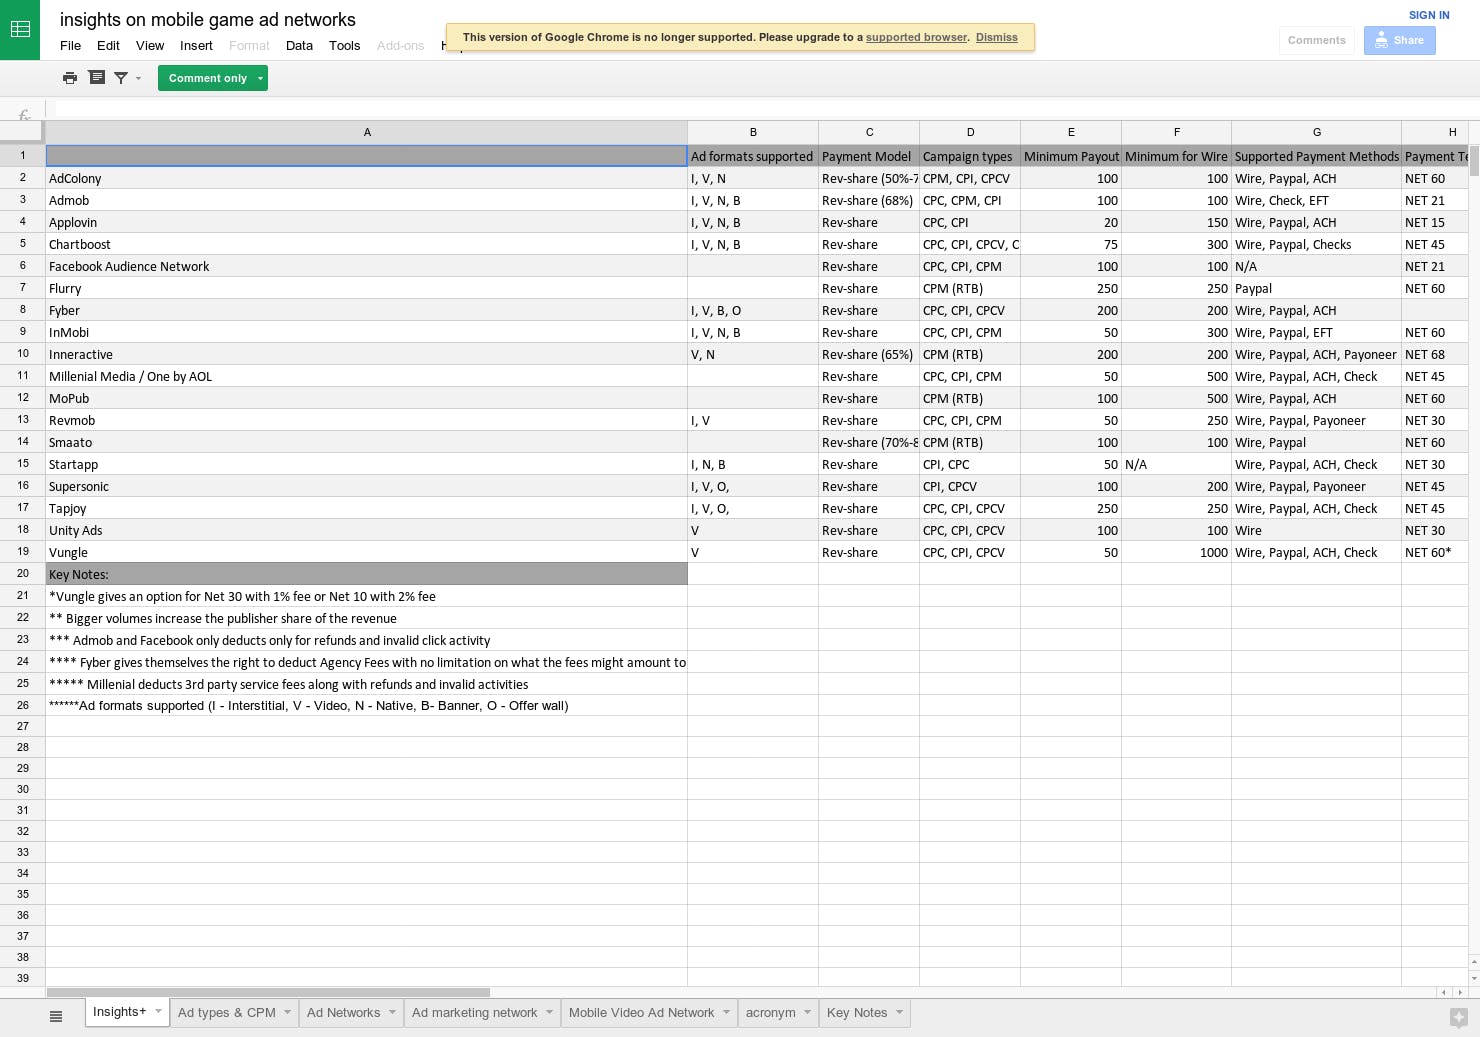 google spreadsheet w/ insights on mobile game ad networks media 1